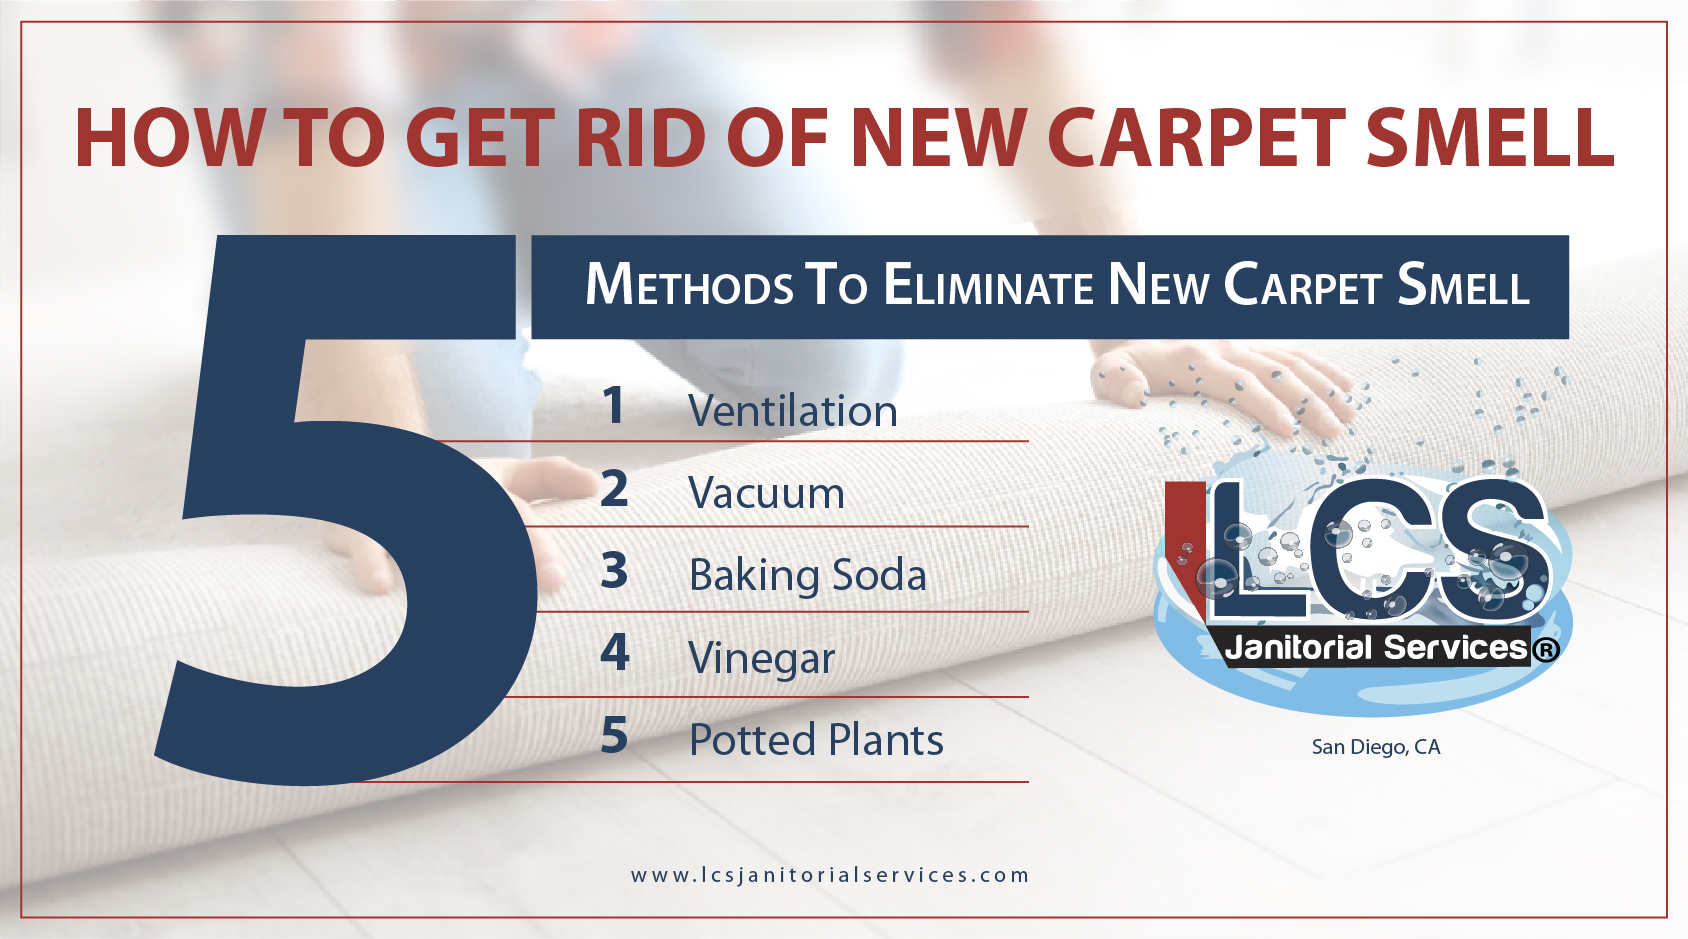 How To Get Rid Of New Carpet Smell